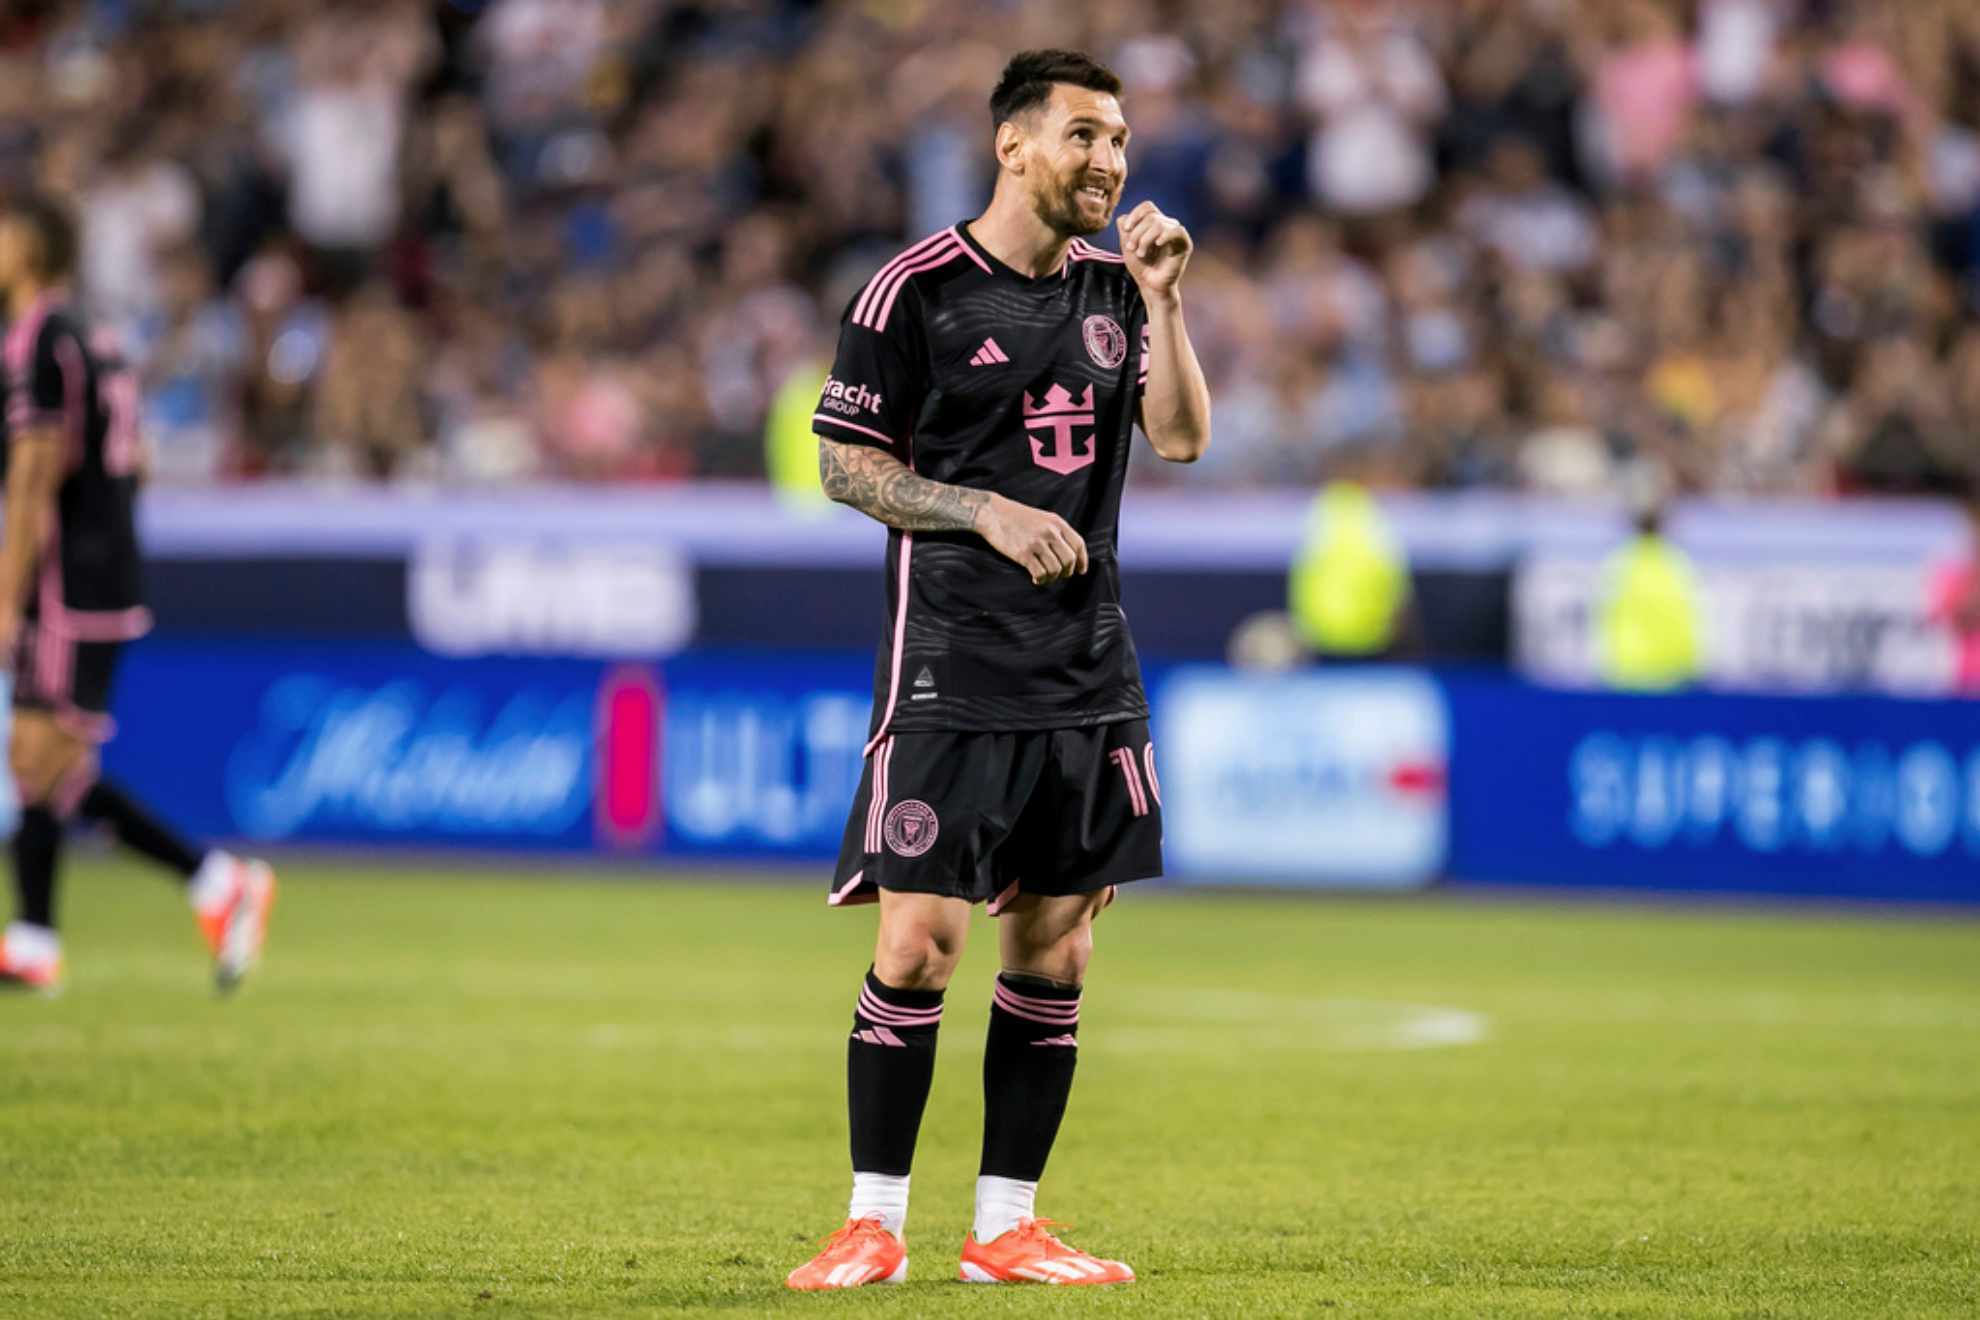 Lionel Messi reacts during the first half of an MLS soccer match against Sporting Kansas City